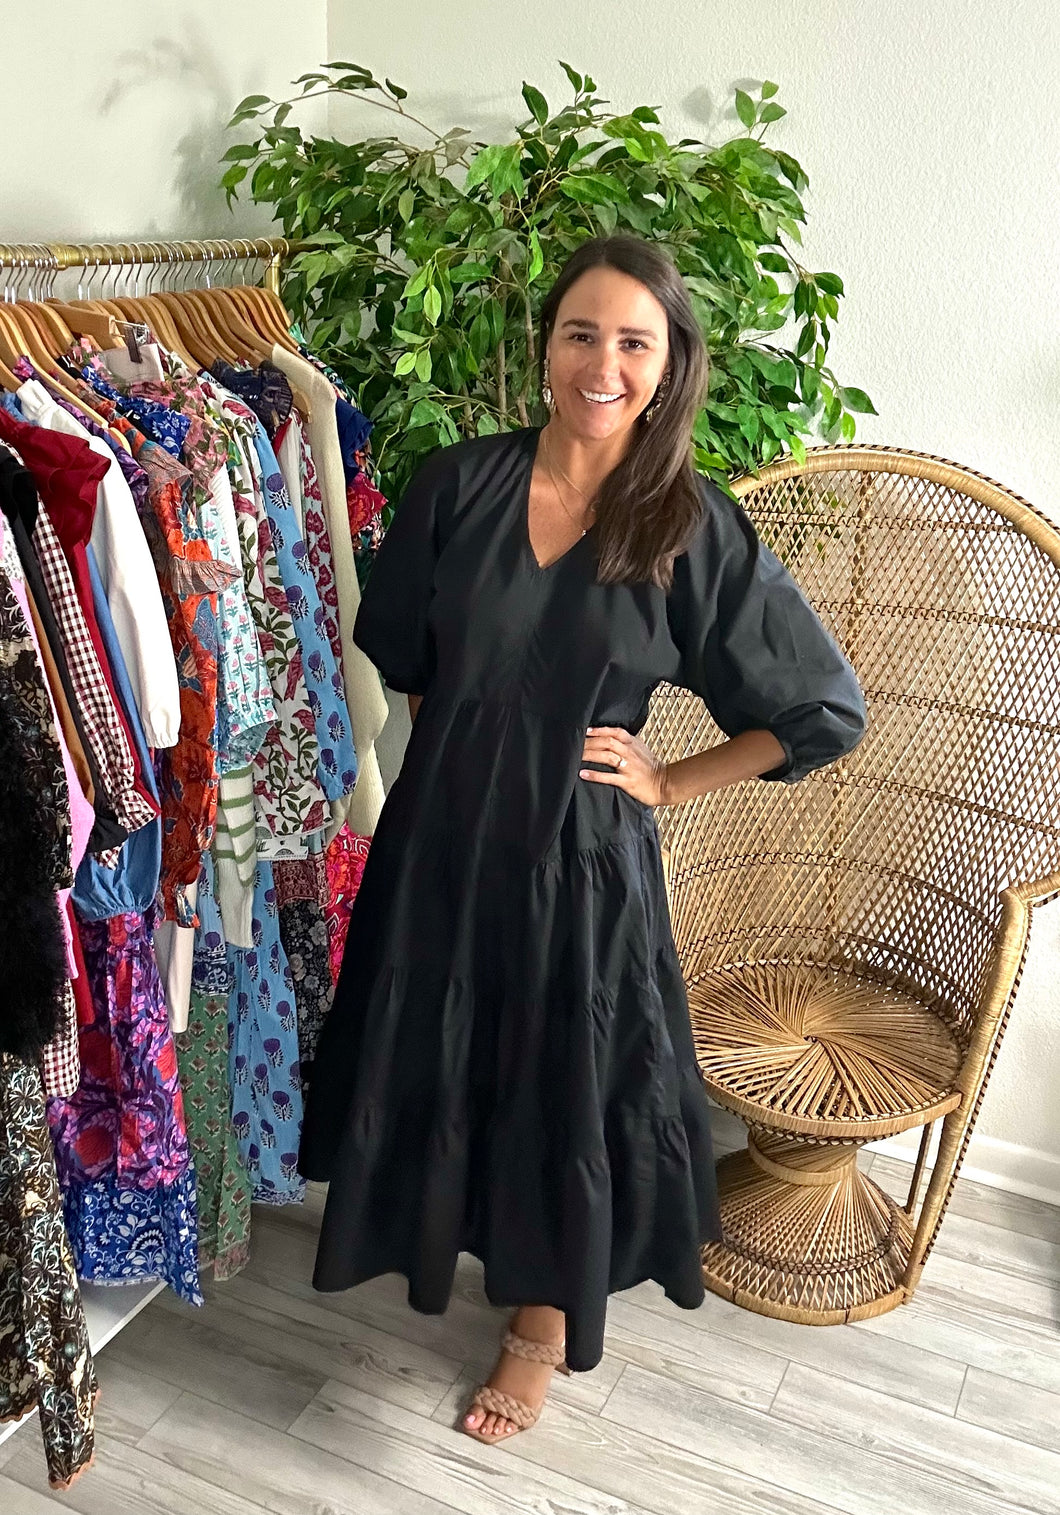 Black midi dress with balloon sleeves and tiered skirt. Poplin cotton blend, light weight. Modest v-neck.  True to size, fits roomy, wearing size small.  Good for bump, post bump or no bump!